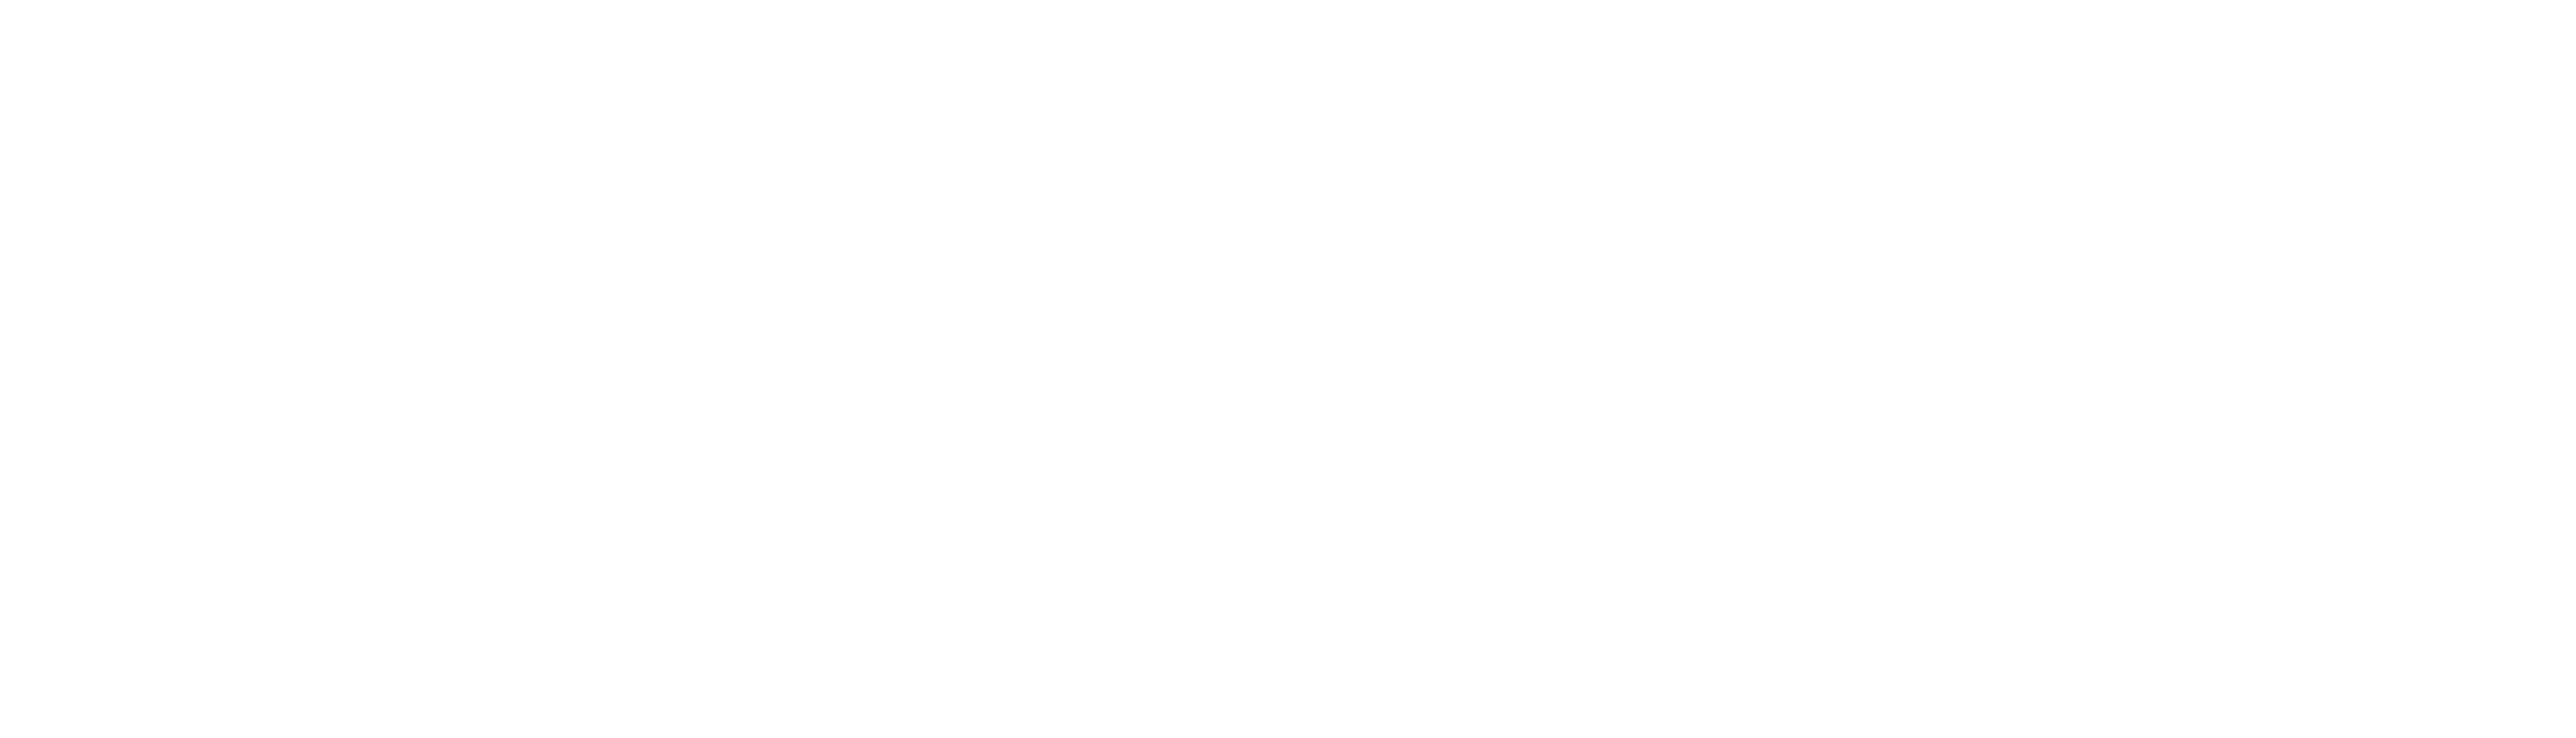 Automotive Analytics and Attribution Summit (AAAS) – Hosted by Brian Pasch